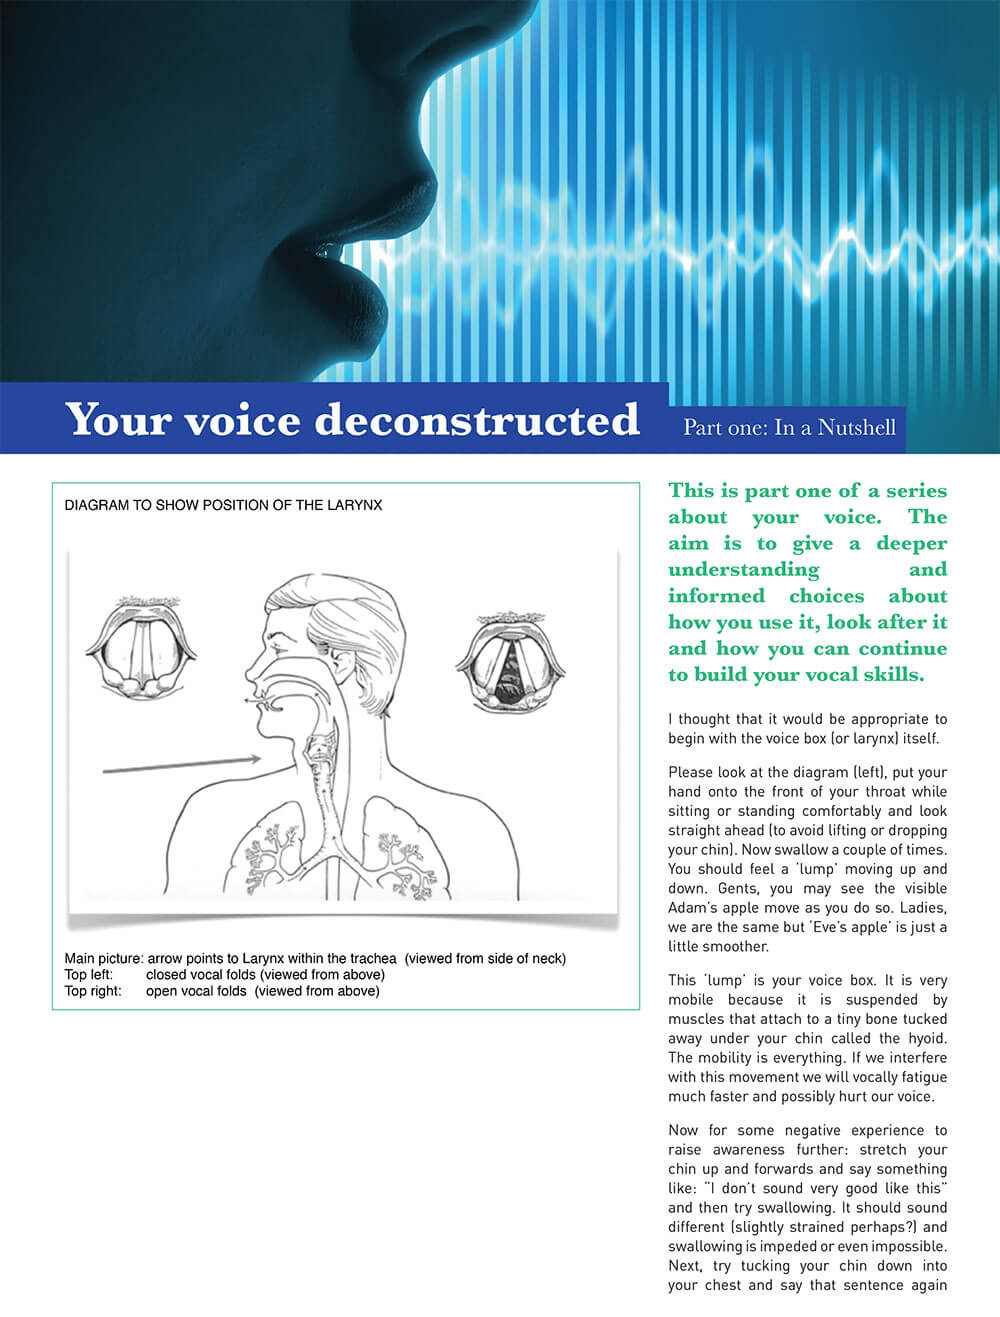 The VoiceeOver Network Voice Deconstructed by Yvonne Morley